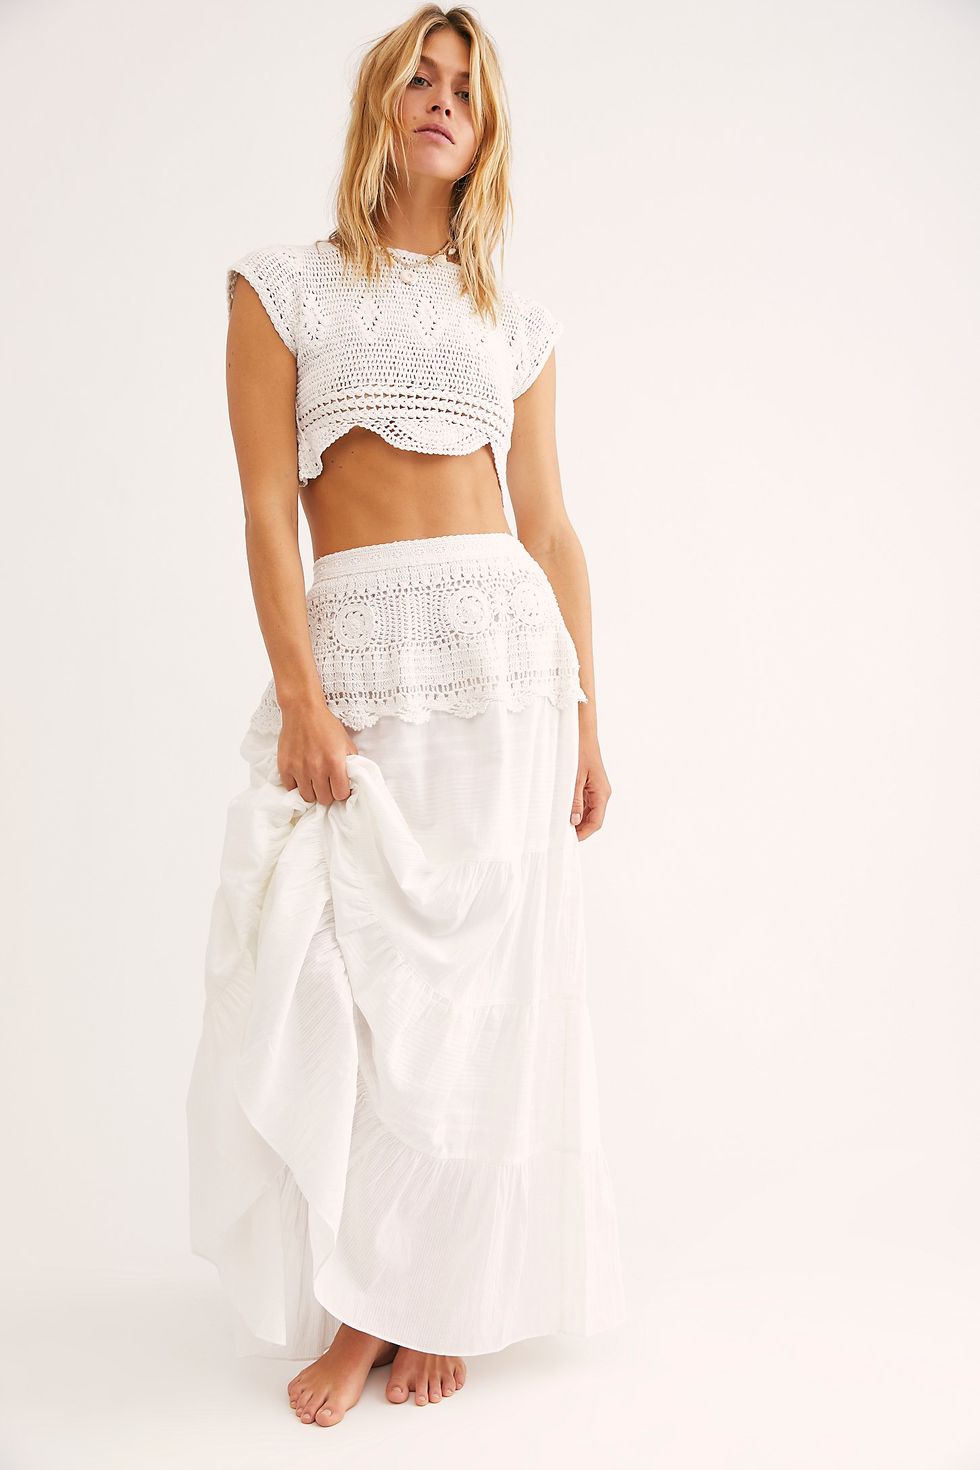 Free People Sunchaser Crochet Top in White